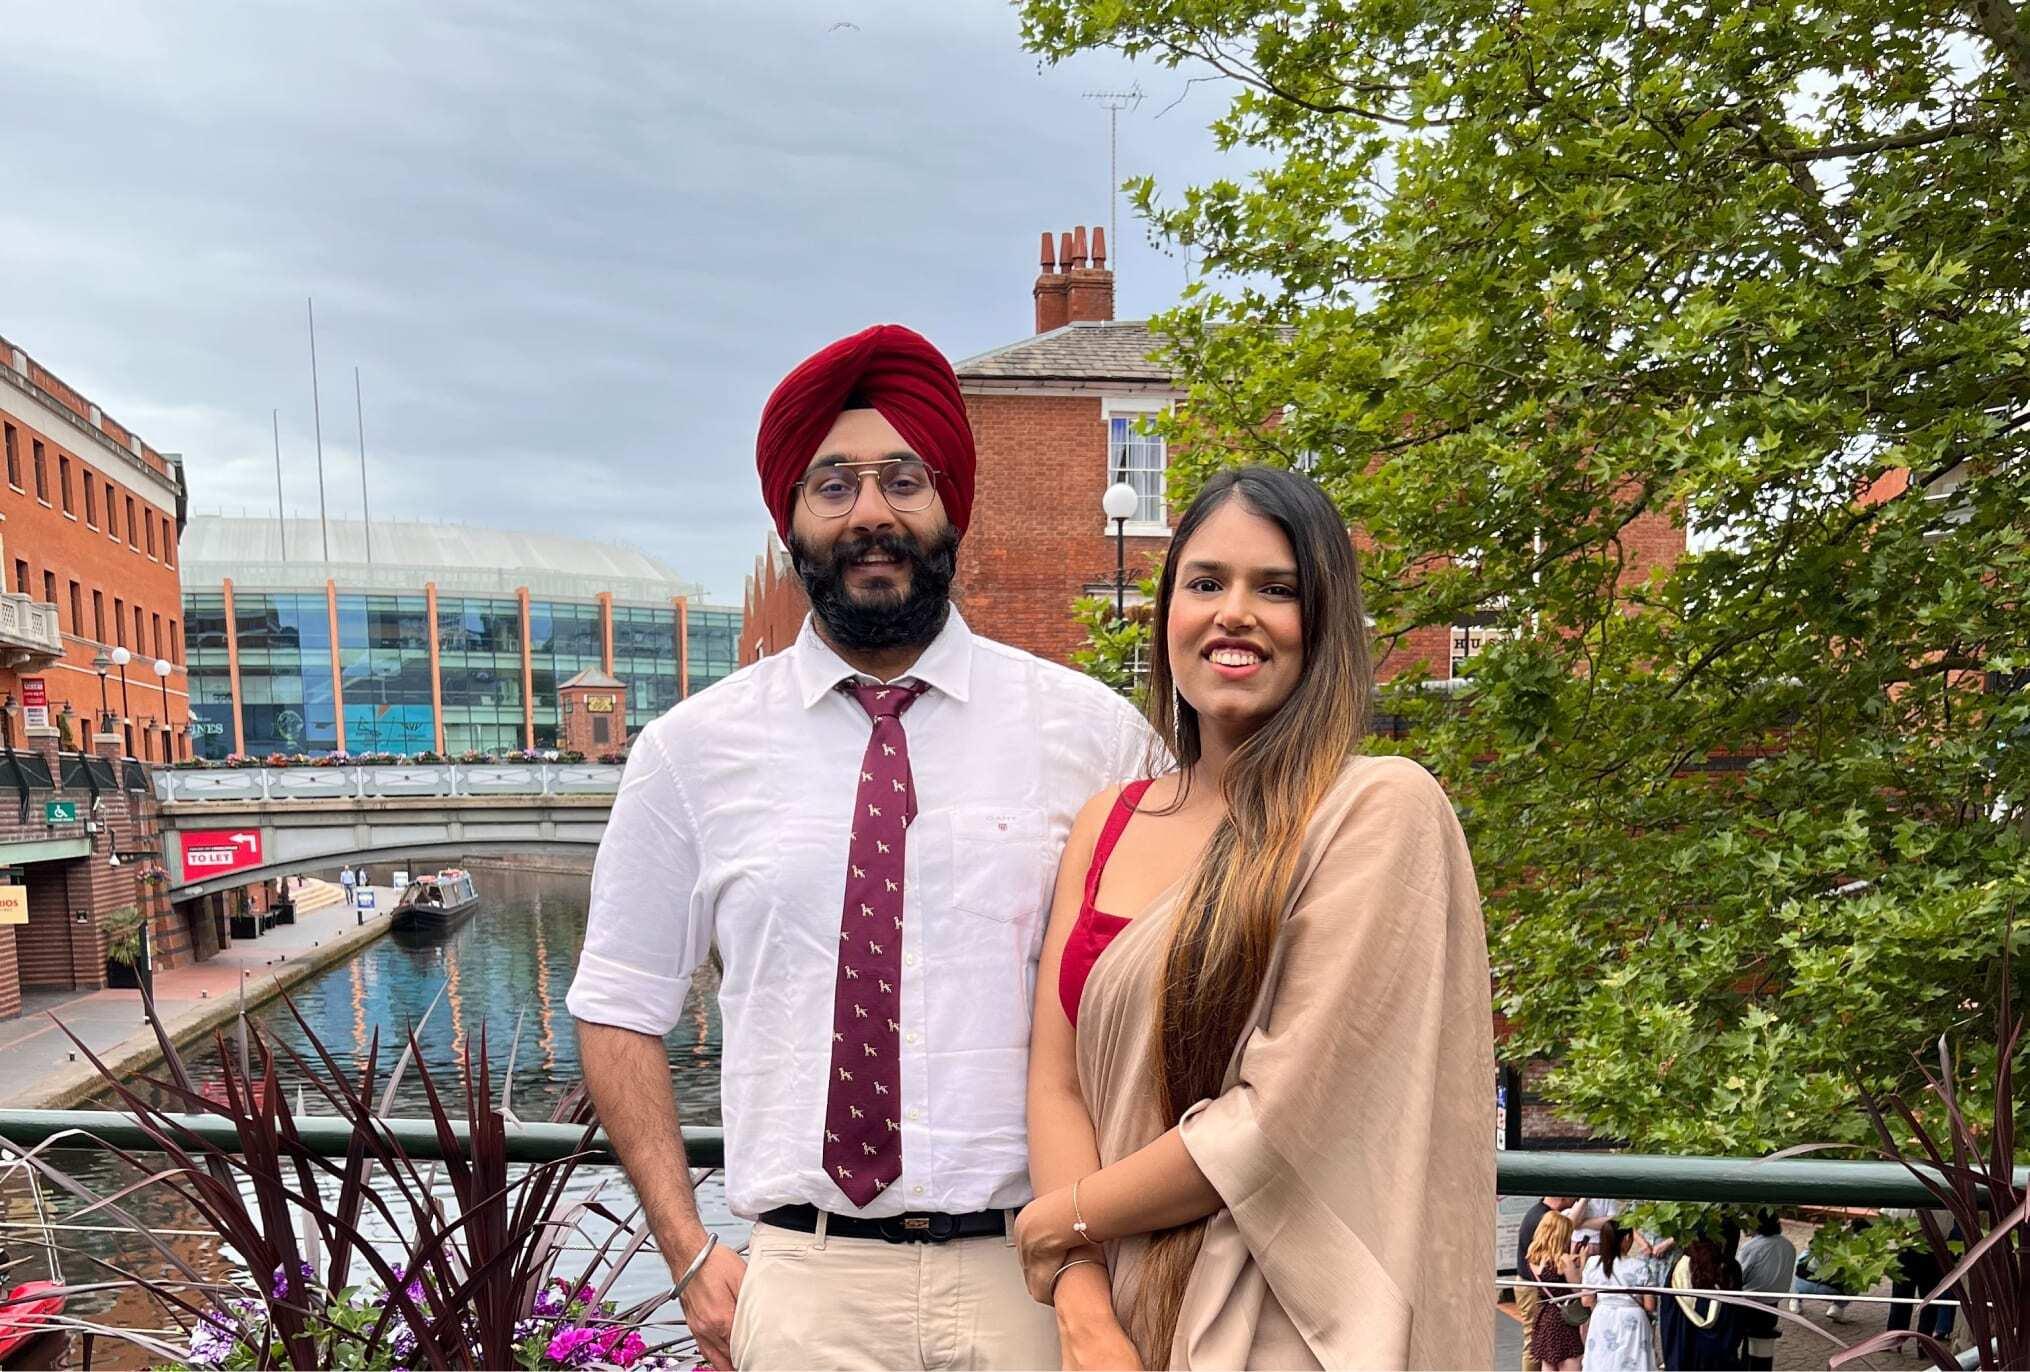 Adjusting to a Foreign City, Harsimran and Jaibir Found Home in Each Other